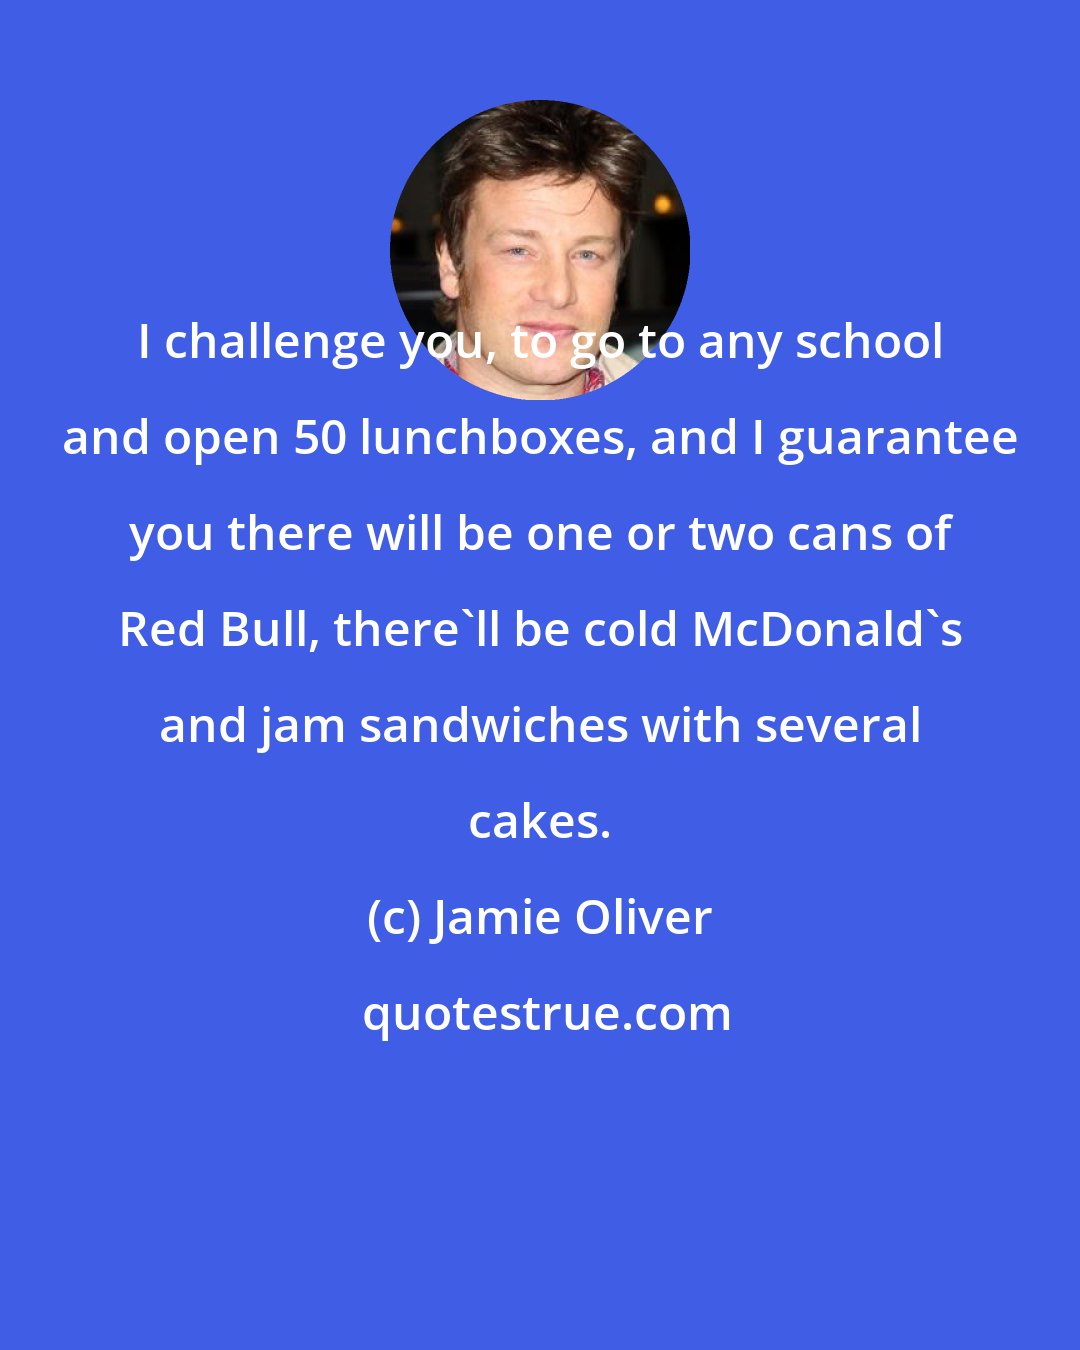 Jamie Oliver: I challenge you, to go to any school and open 50 lunchboxes, and I guarantee you there will be one or two cans of Red Bull, there'll be cold McDonald's and jam sandwiches with several cakes.